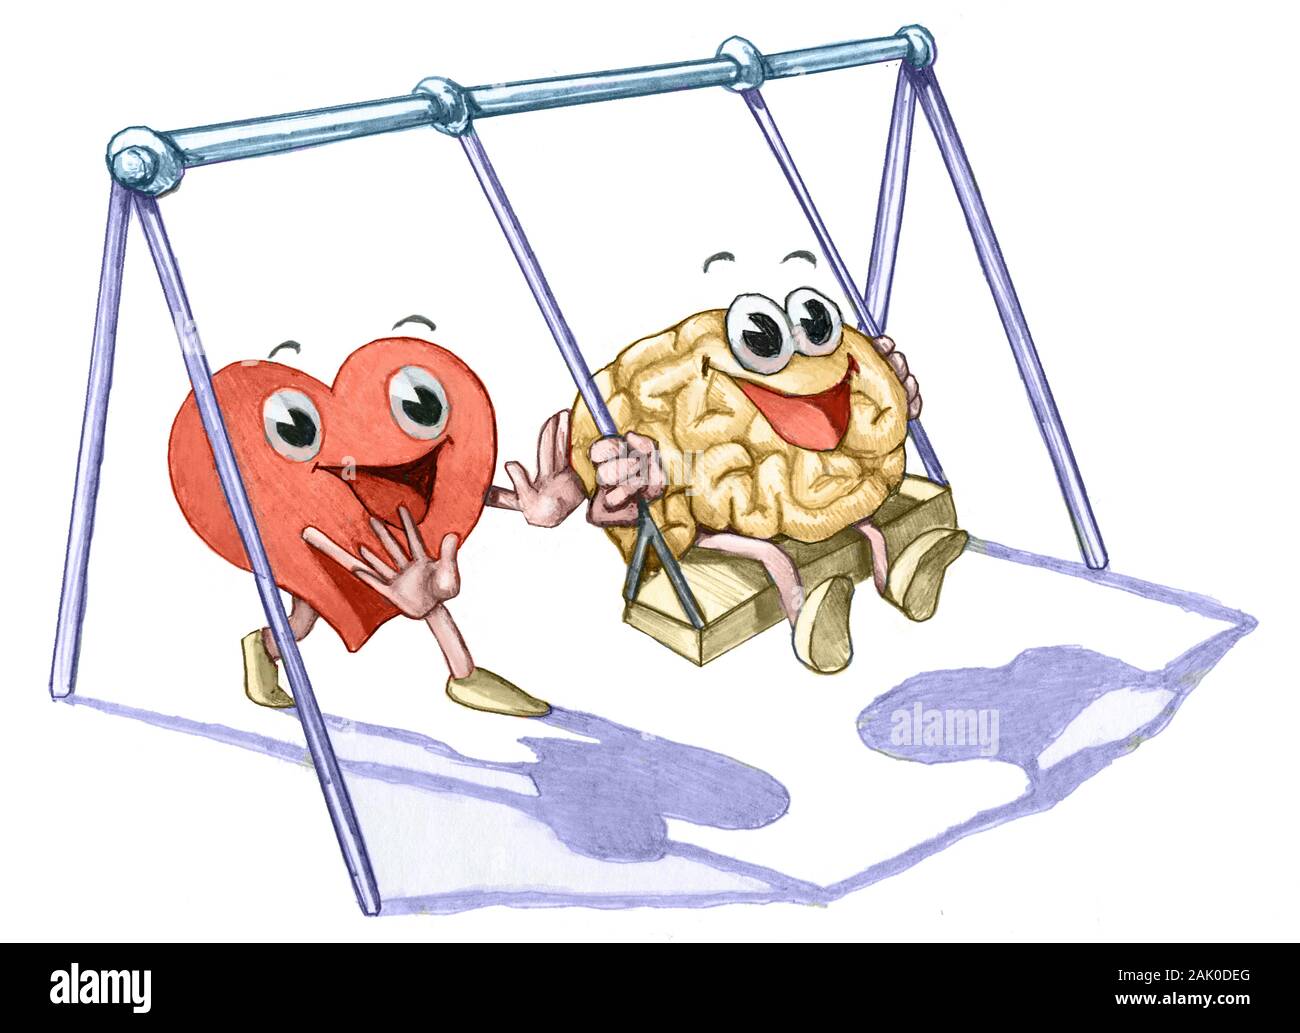 heart pushes on swing the brain allegory of collaboration between intelligence and feelings Stock Photo